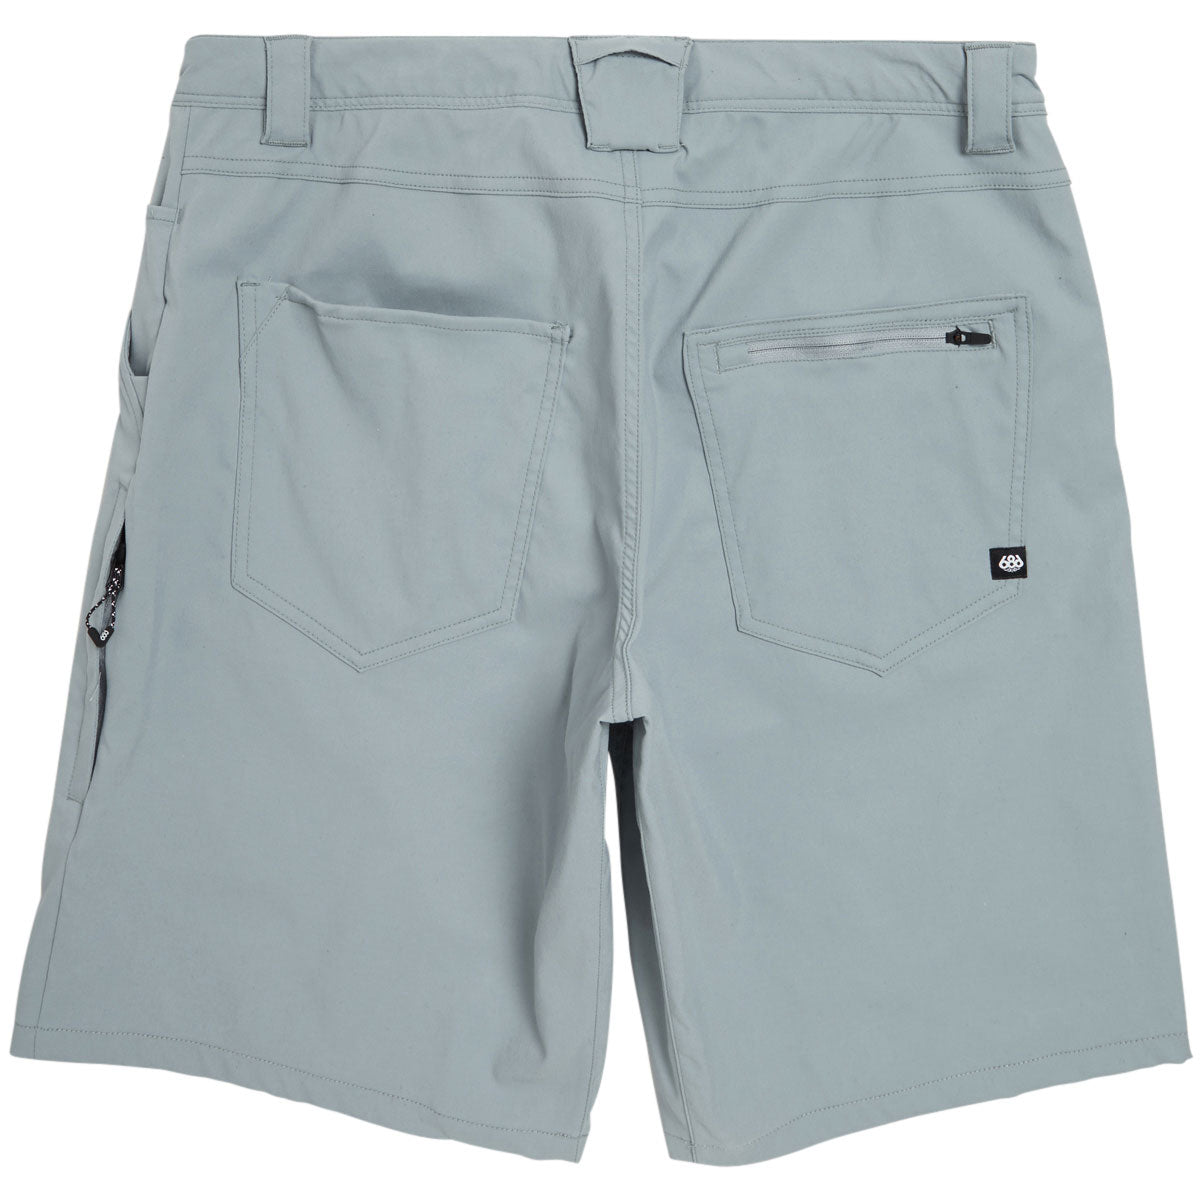 686 Everywhere Hybrid Relaxed Fit Shorts - Lead image 5